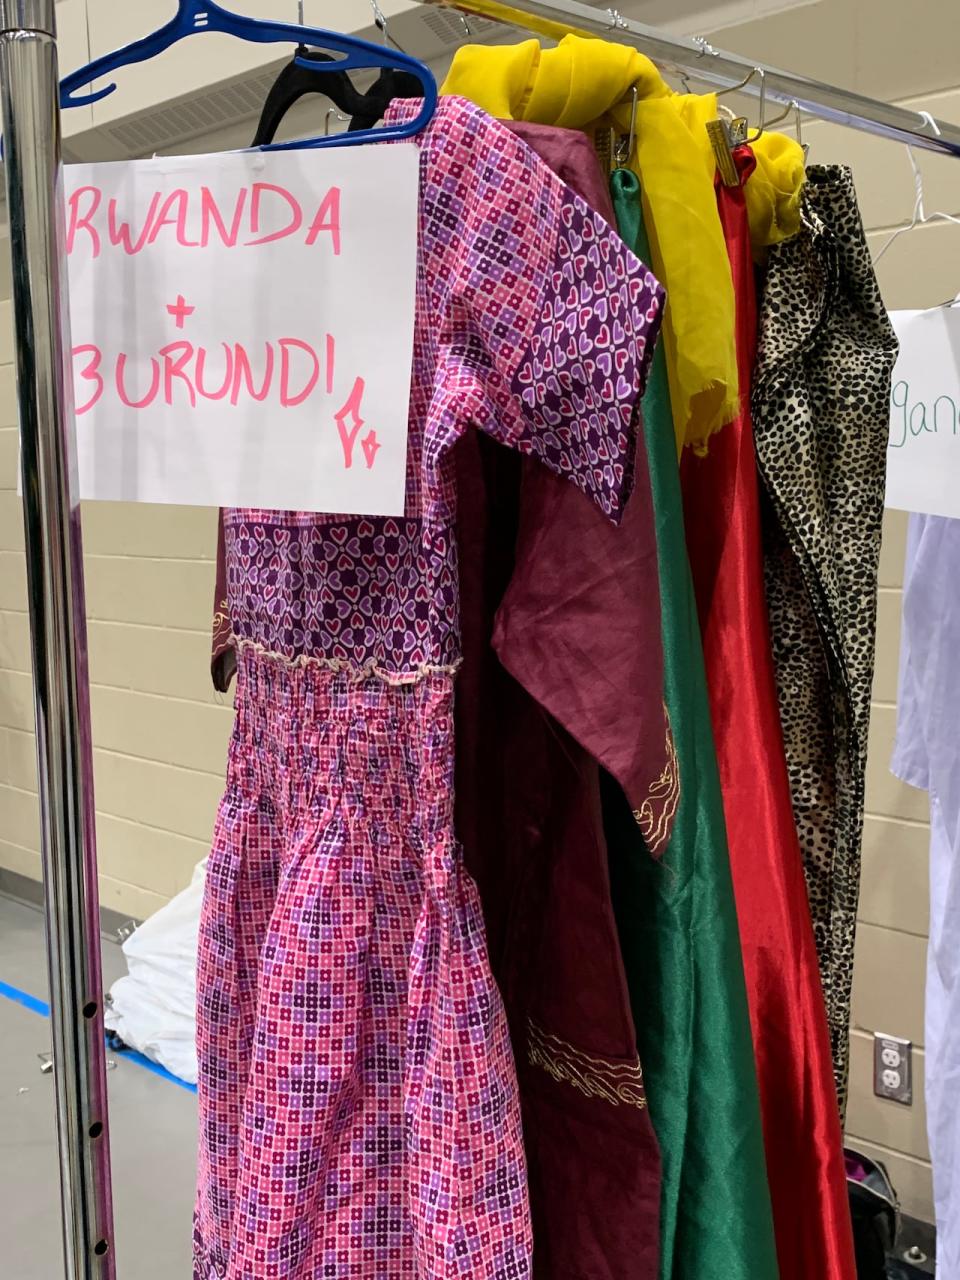 Community members created an entire gallery of East African traditional clothing for the Sharing Knowledge event, highlighting the diversity both between and within countries.  